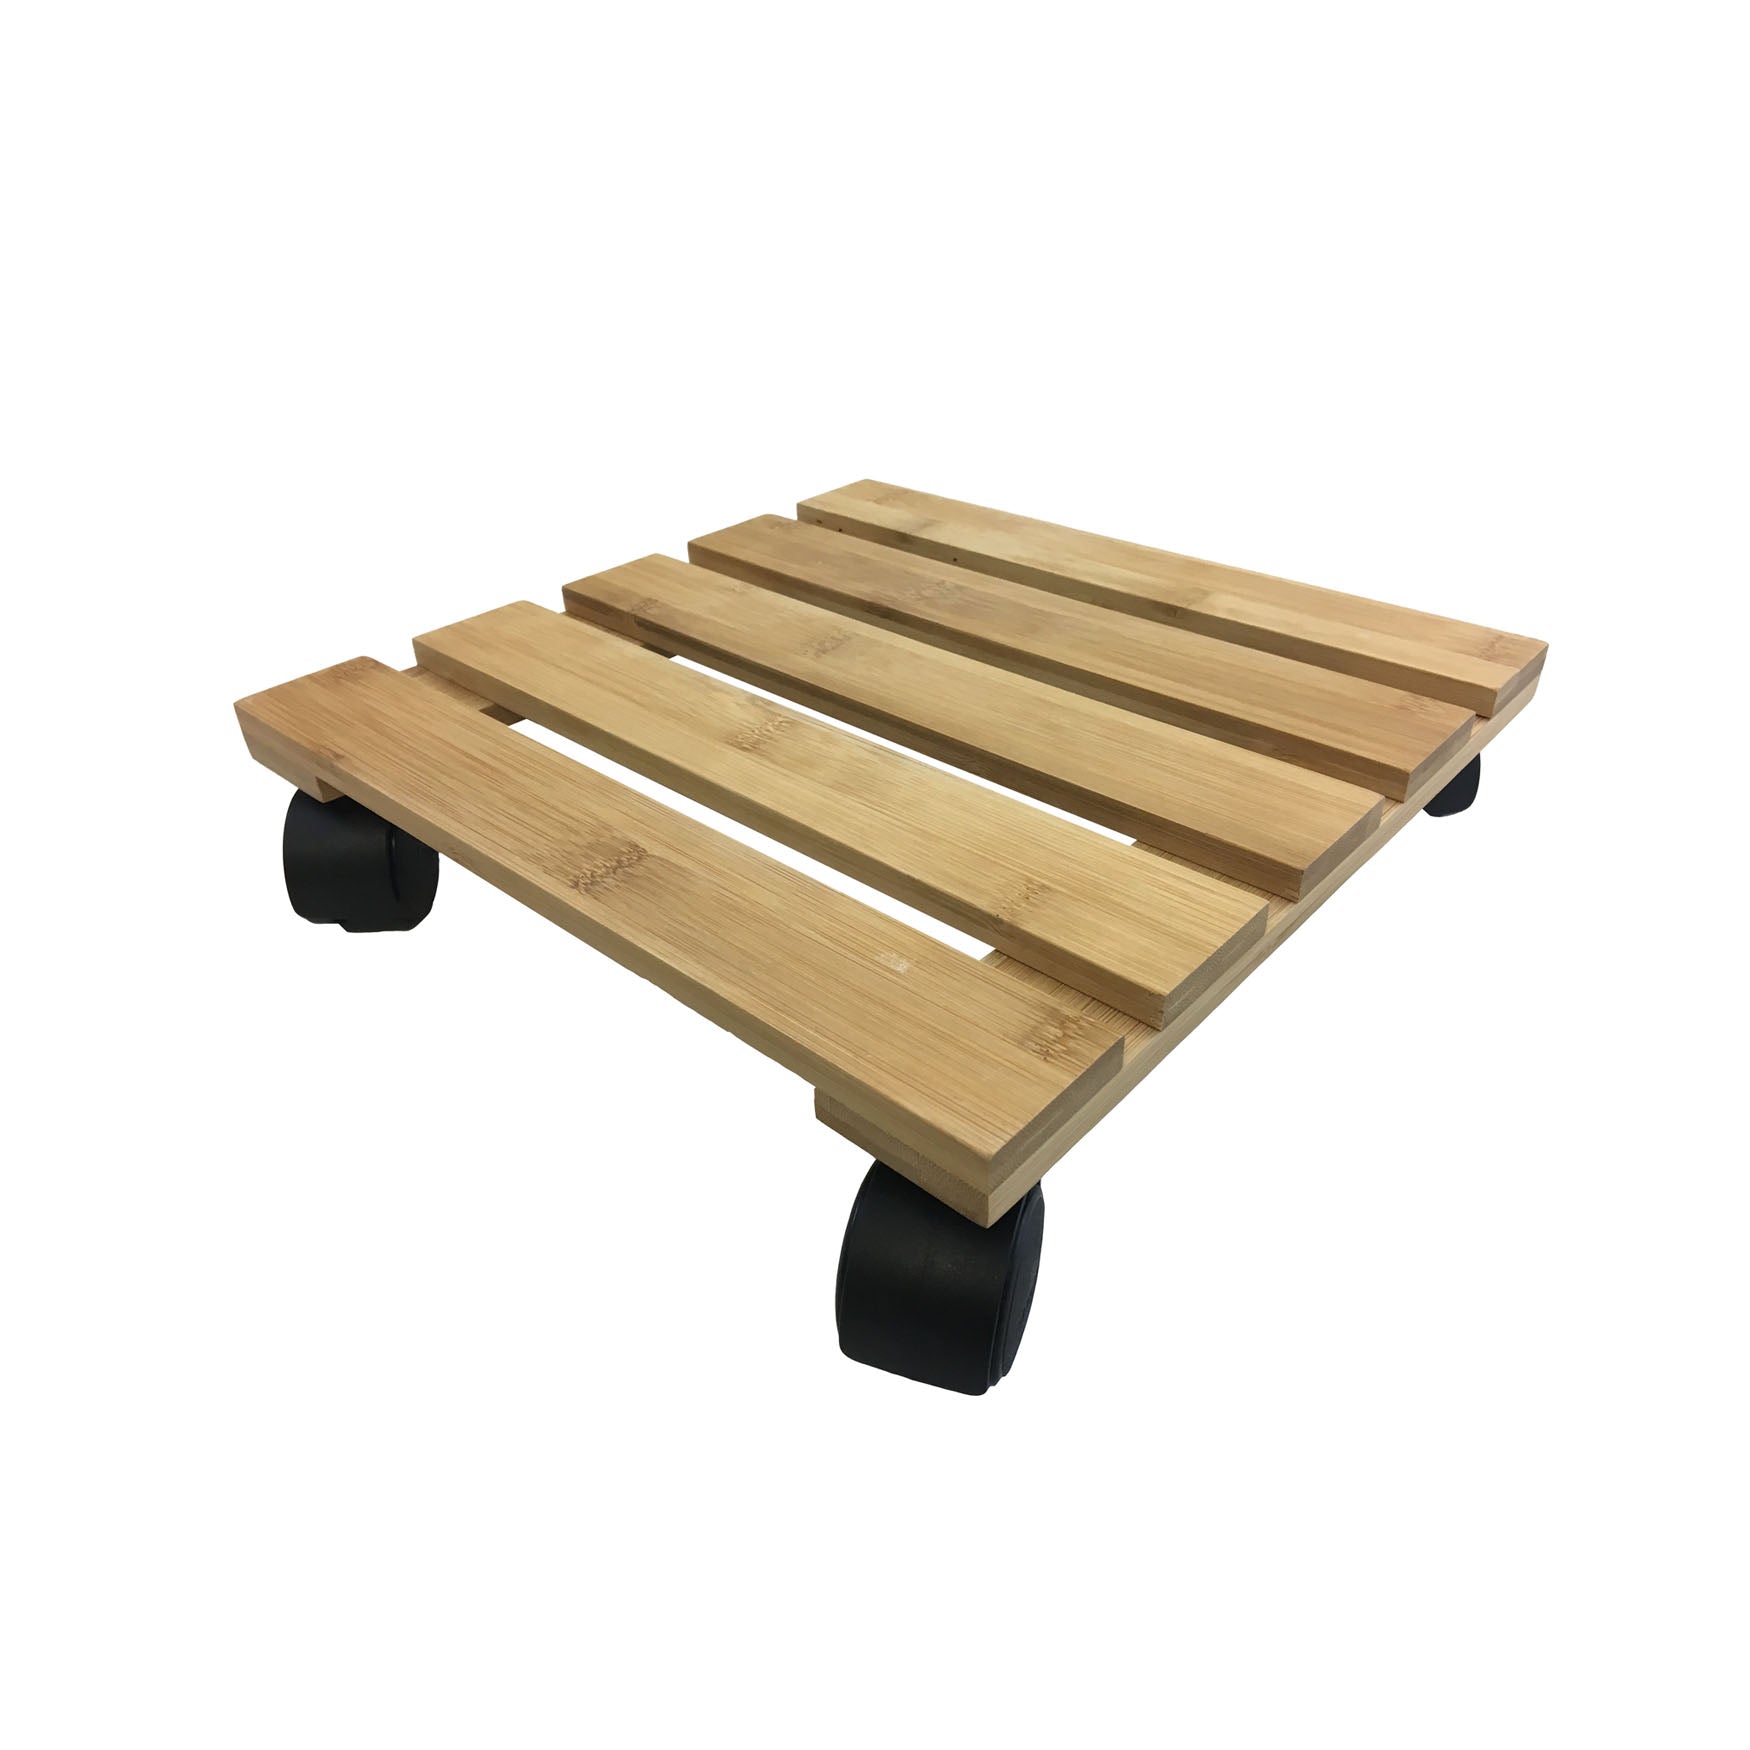  Square Bamboo Plant Caddy. 220 lbs. capacity. 11.4"D x 2.75"H, 1.65 lbs.